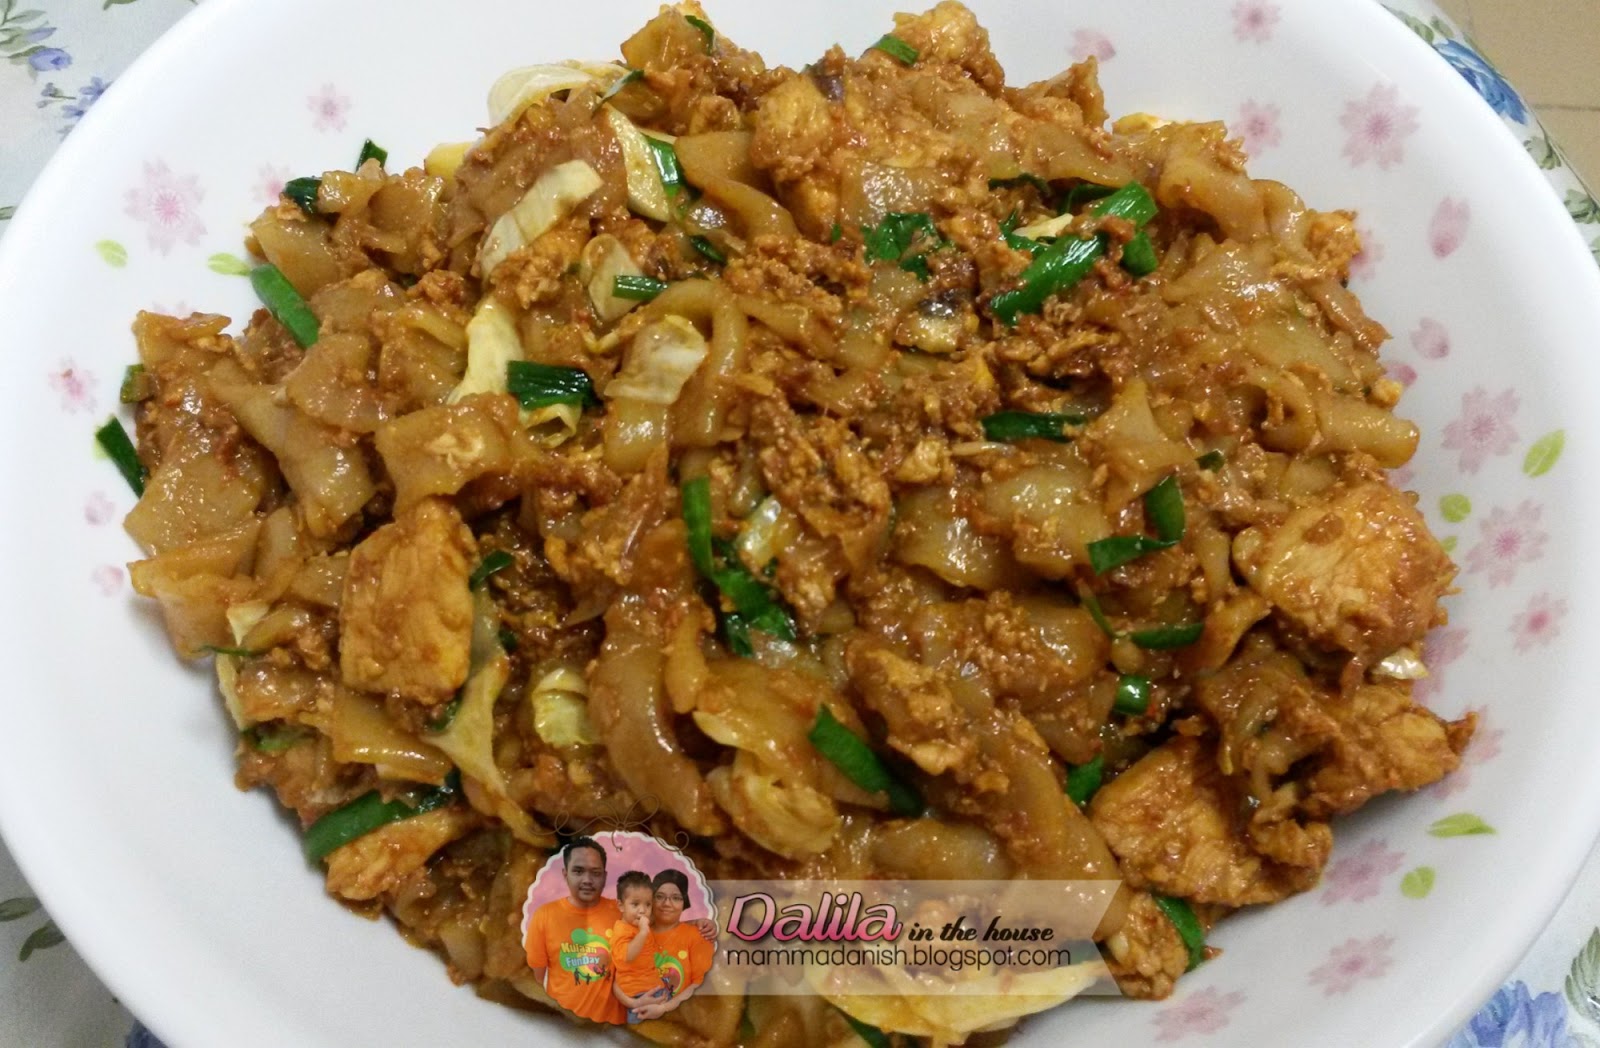 Dalila in the house: Resepi Kuey Teow Goreng Simple n Sedap